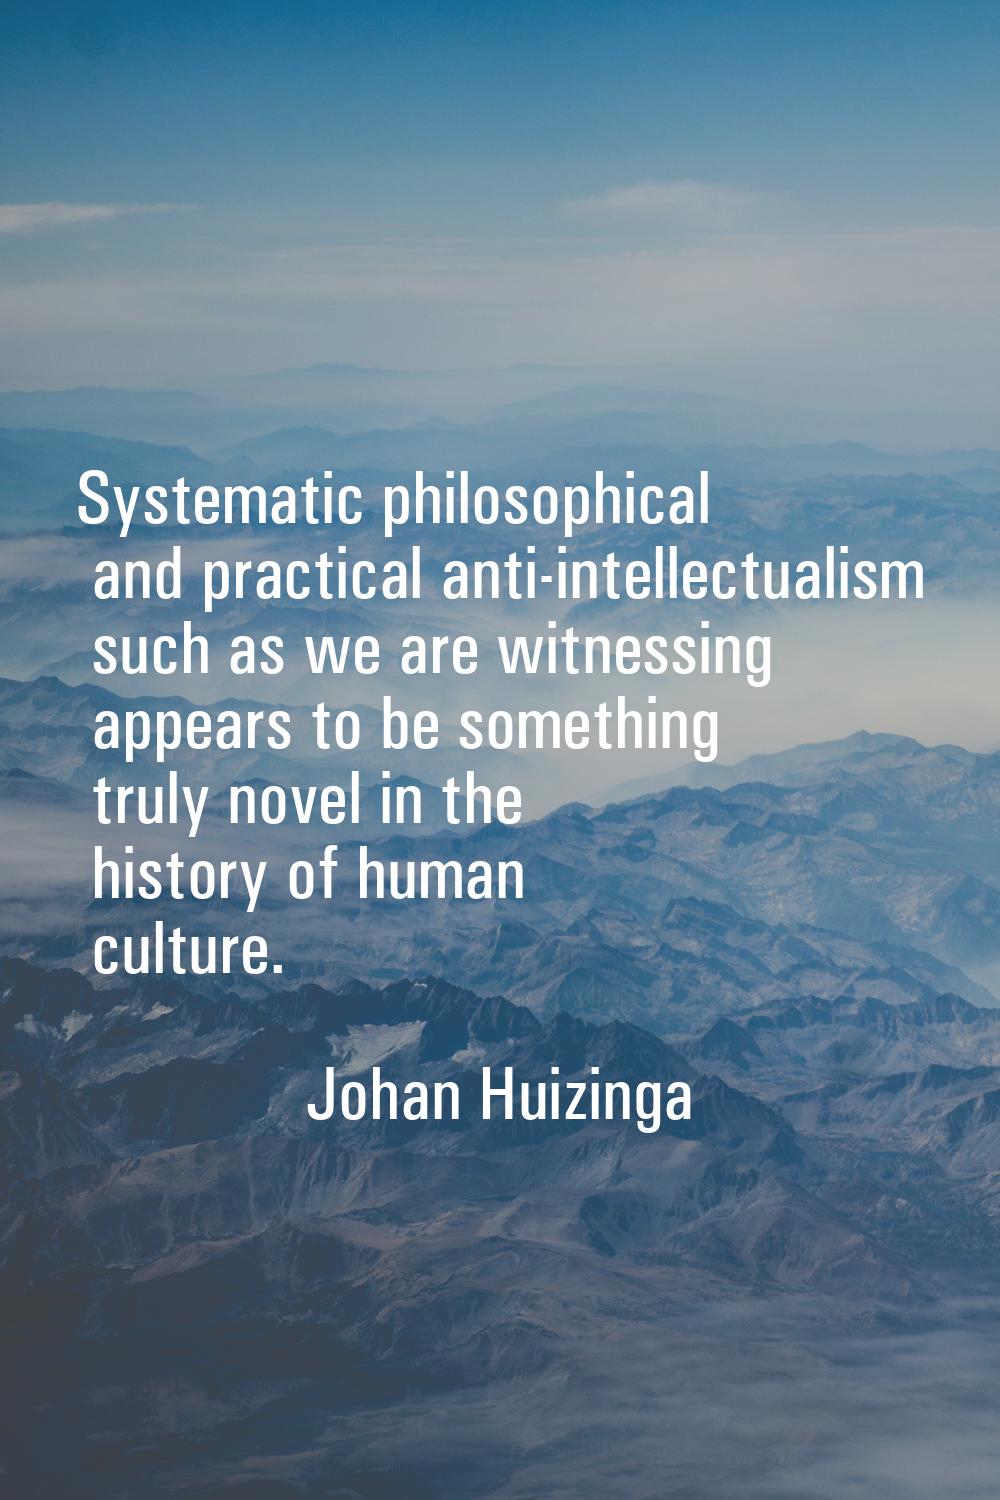 Systematic philosophical and practical anti-intellectualism such as we are witnessing appears to be